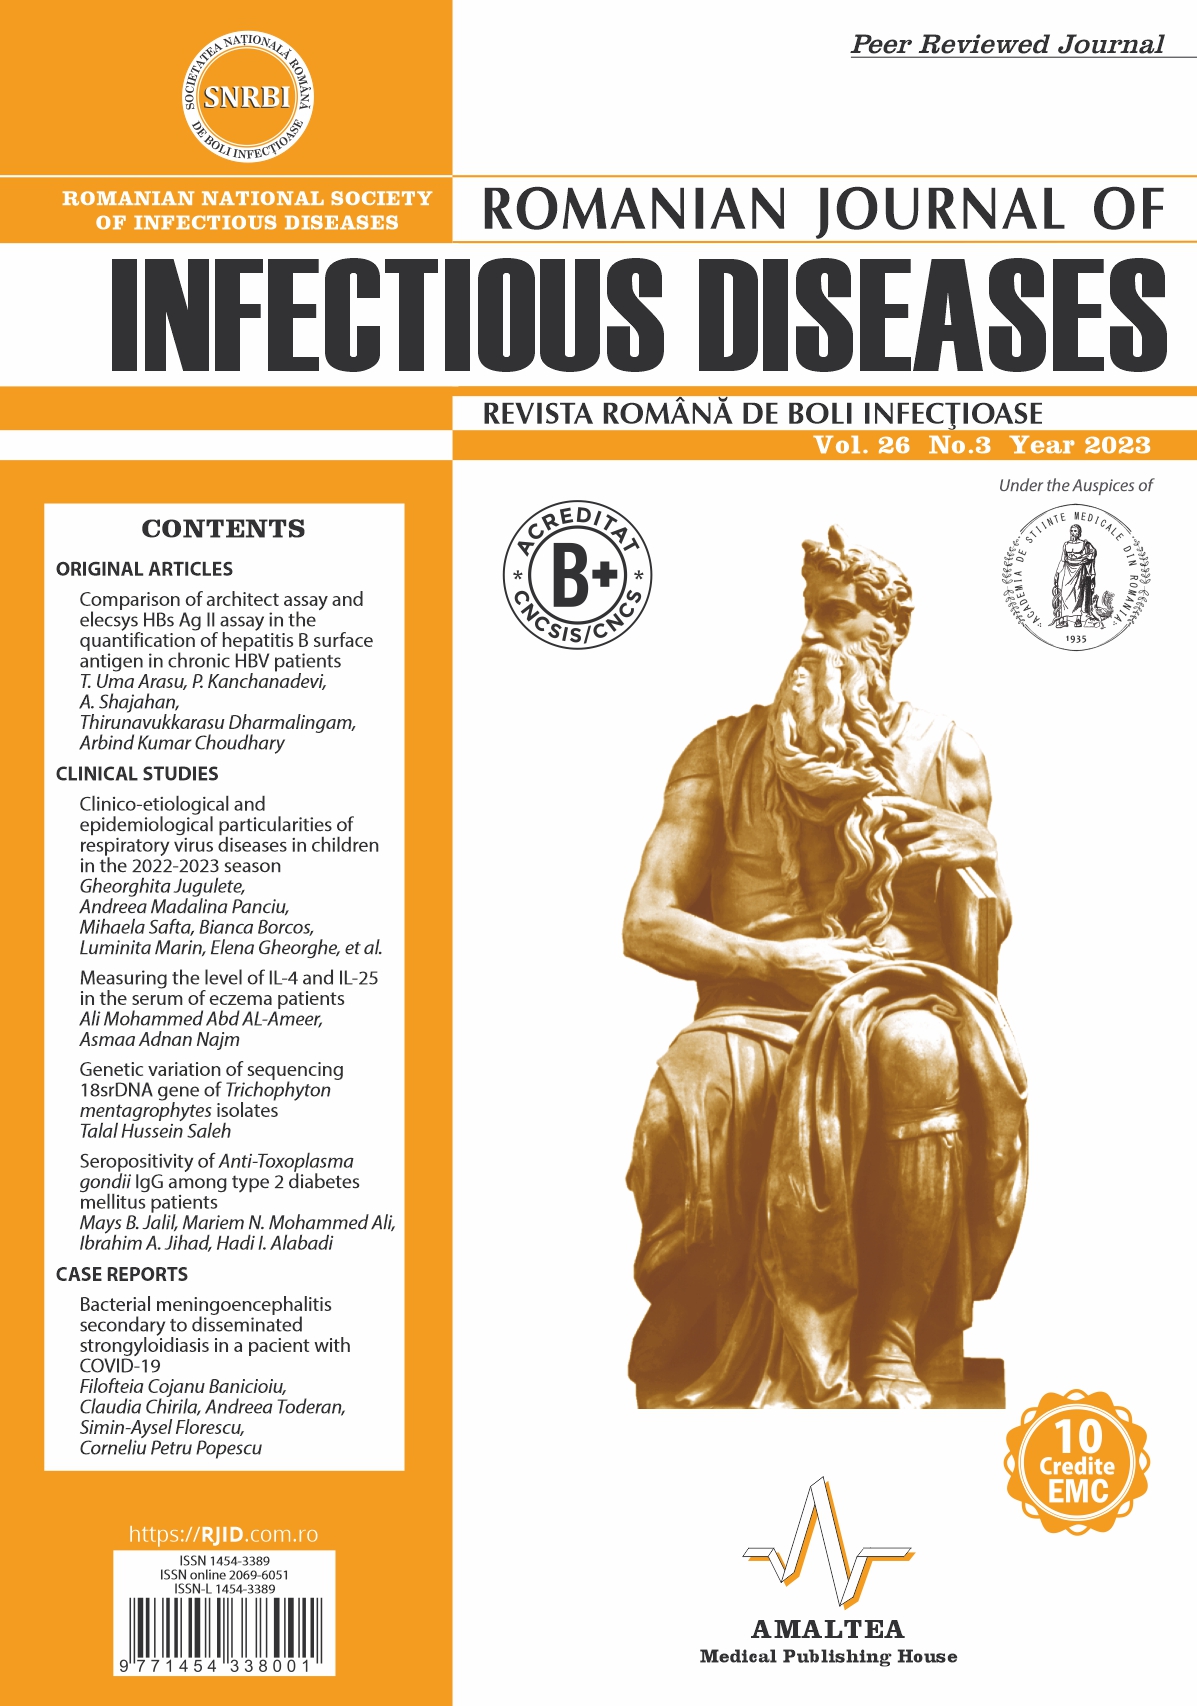 Romanian Journal of Infectious Diseases - Vol. 26, No. 3, 2023